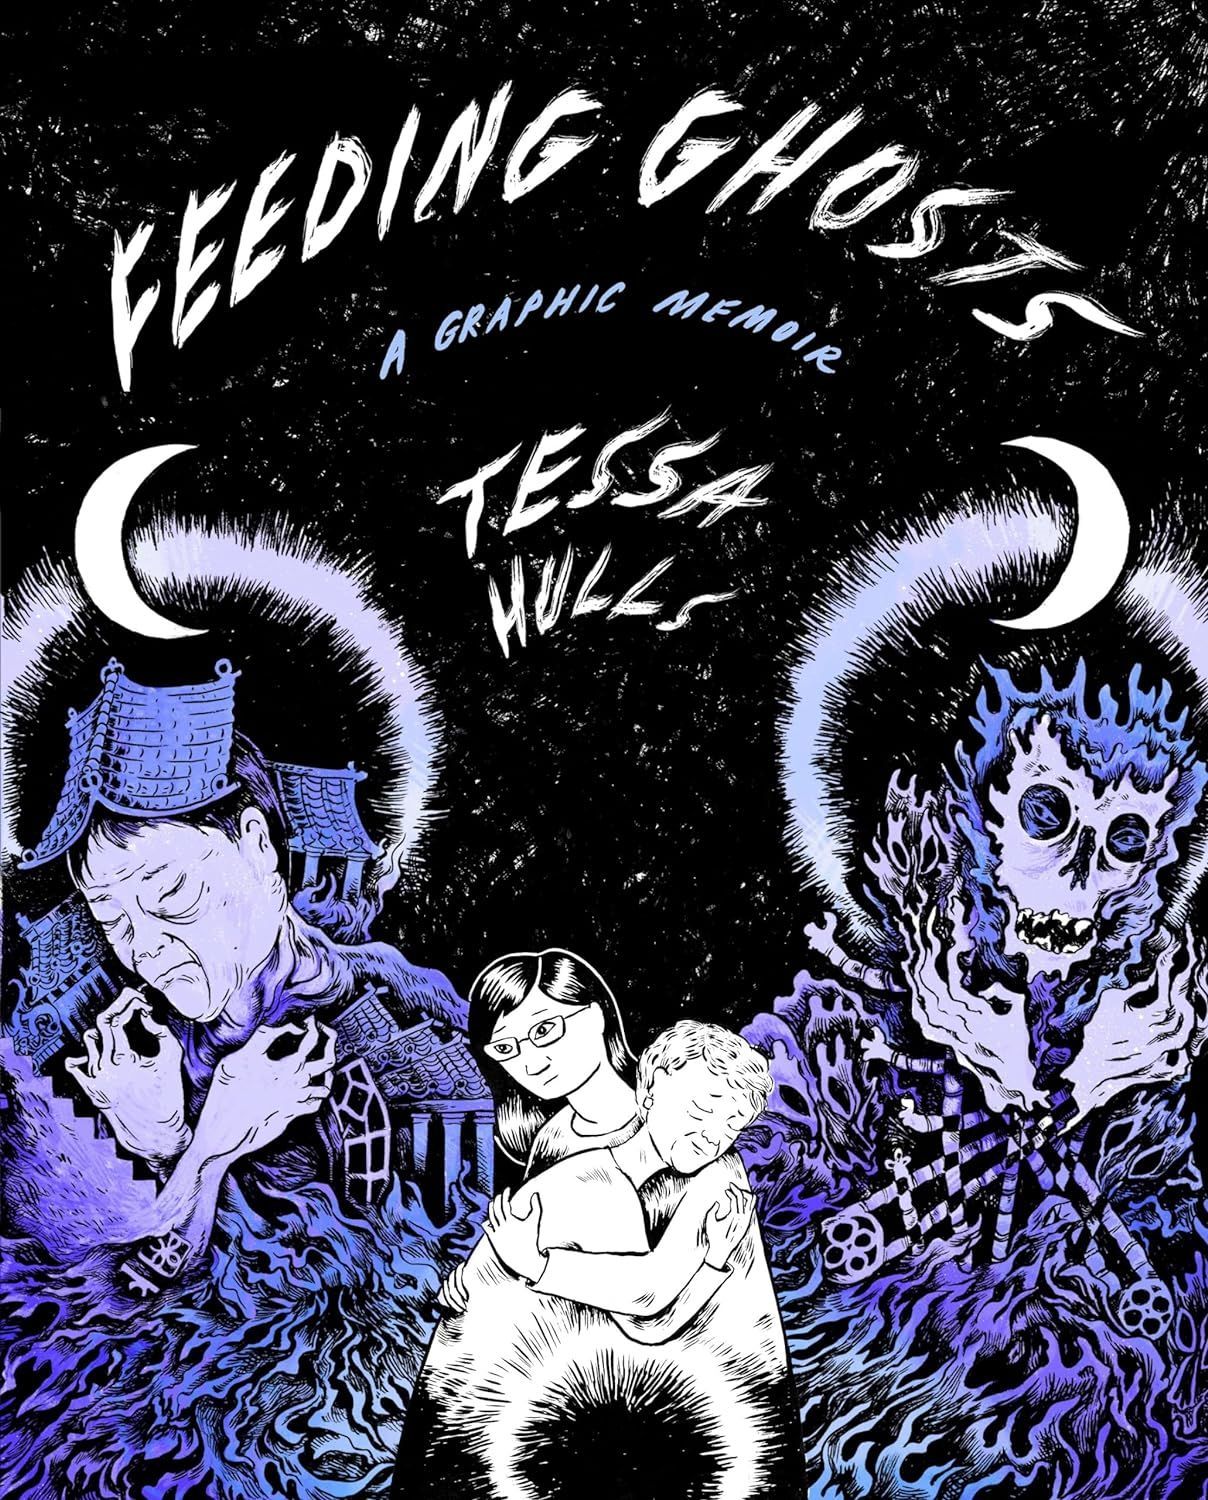 The Contours of Negative Space: On Tessa Hulls’s “Feeding Ghosts”